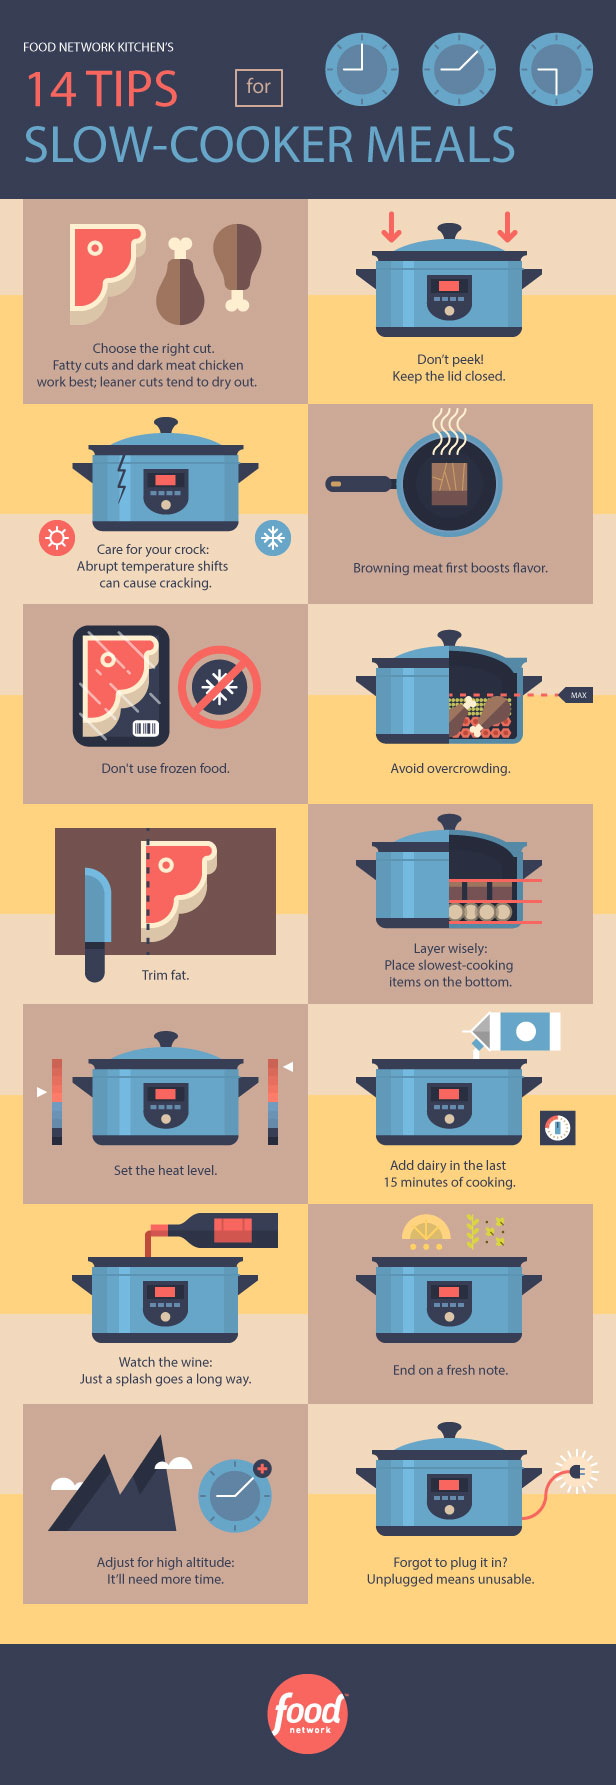 New Slow Cooker Tips